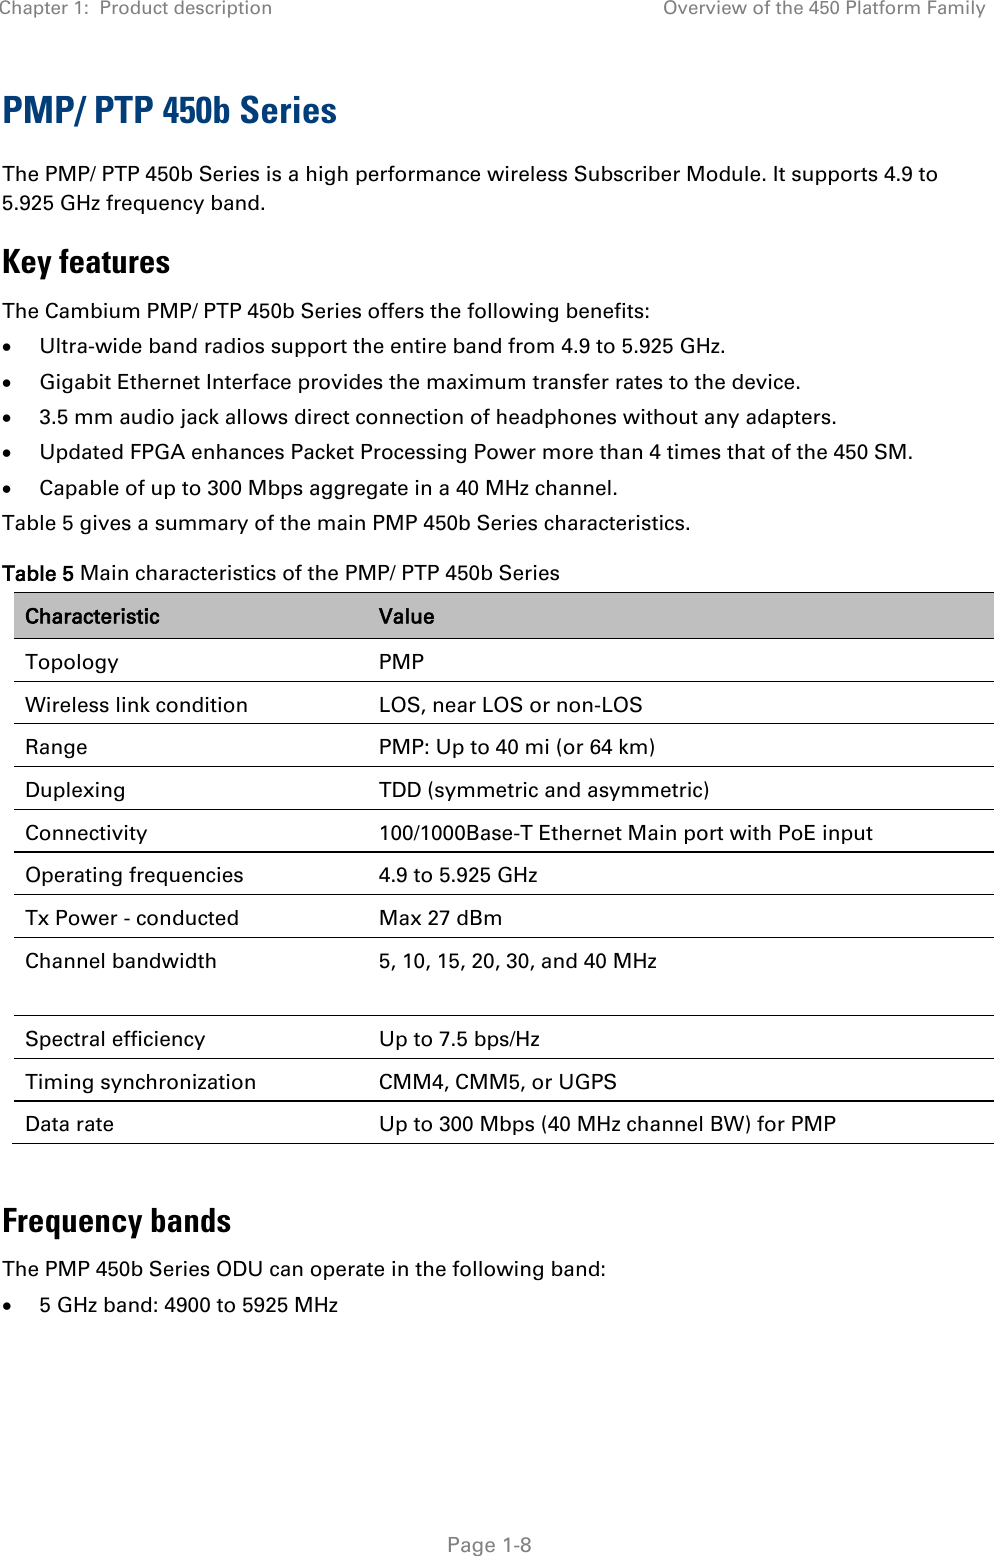 Chapter 1:  Product description Overview of the 450 Platform Family   Page 1-8 PMP/ PTP 450b Series The PMP/ PTP 450b Series is a high performance wireless Subscriber Module. It supports 4.9 to 5.925 GHz frequency band. Key features The Cambium PMP/ PTP 450b Series offers the following benefits: • Ultra-wide band radios support the entire band from 4.9 to 5.925 GHz. • Gigabit Ethernet Interface provides the maximum transfer rates to the device. • 3.5 mm audio jack allows direct connection of headphones without any adapters. • Updated FPGA enhances Packet Processing Power more than 4 times that of the 450 SM. • Capable of up to 300 Mbps aggregate in a 40 MHz channel. Table 5 gives a summary of the main PMP 450b Series characteristics. Table 5 Main characteristics of the PMP/ PTP 450b Series Characteristic Value Topology  PMP Wireless link condition LOS, near LOS or non-LOS Range  PMP: Up to 40 mi (or 64 km) Duplexing  TDD (symmetric and asymmetric) Connectivity 100/1000Base-T Ethernet Main port with PoE input Operating frequencies 4.9 to 5.925 GHz Tx Power - conducted  Max 27 dBm Channel bandwidth 5, 10, 15, 20, 30, and 40 MHz  Spectral efficiency Up to 7.5 bps/Hz Timing synchronization CMM4, CMM5, or UGPS Data rate Up to 300 Mbps (40 MHz channel BW) for PMP  Frequency bands The PMP 450b Series ODU can operate in the following band: • 5 GHz band: 4900 to 5925 MHz  